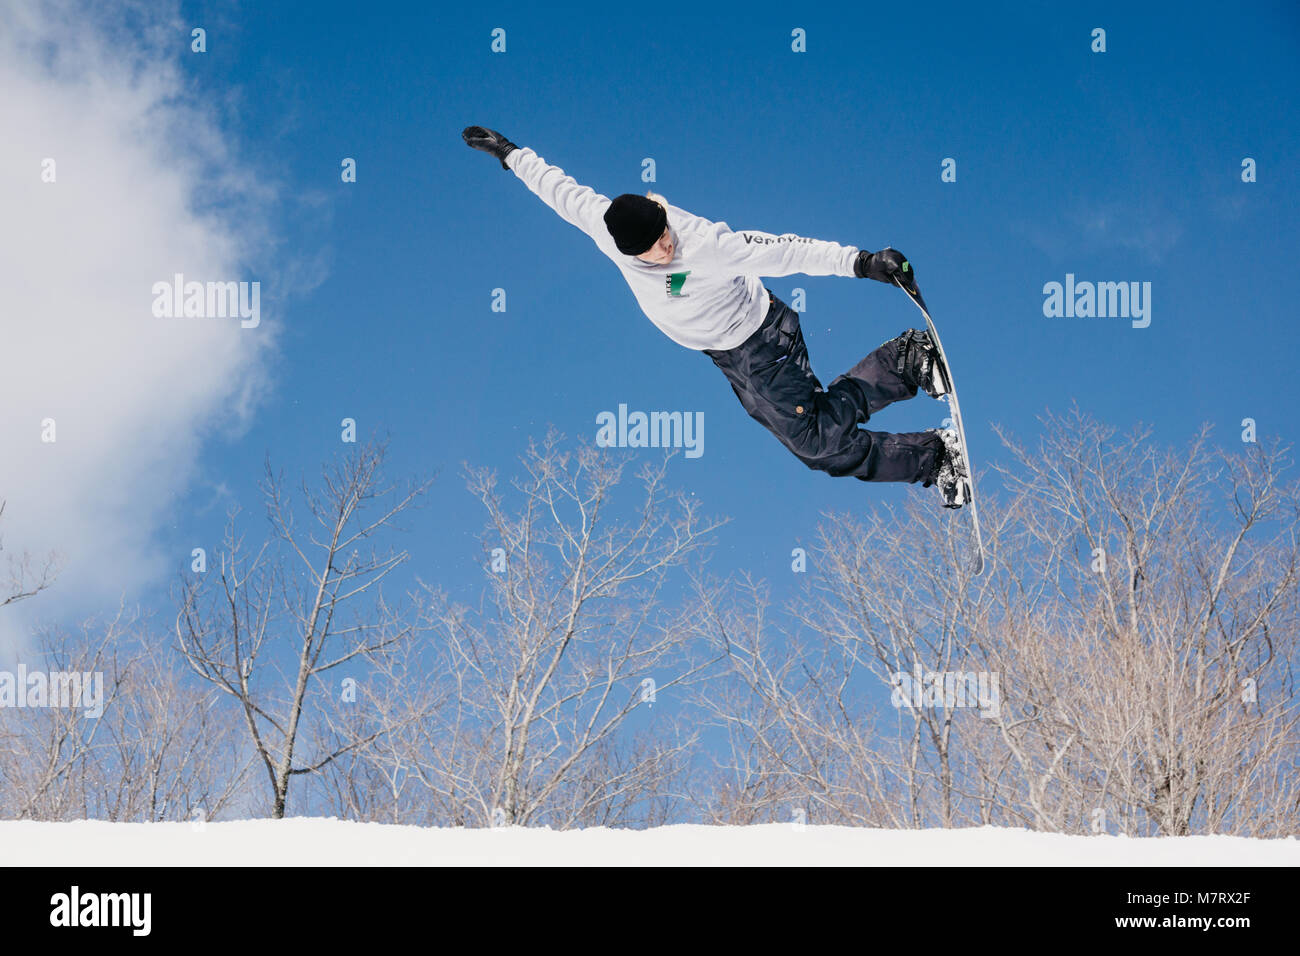 Snowboarder jumping with board grab Stock Photo